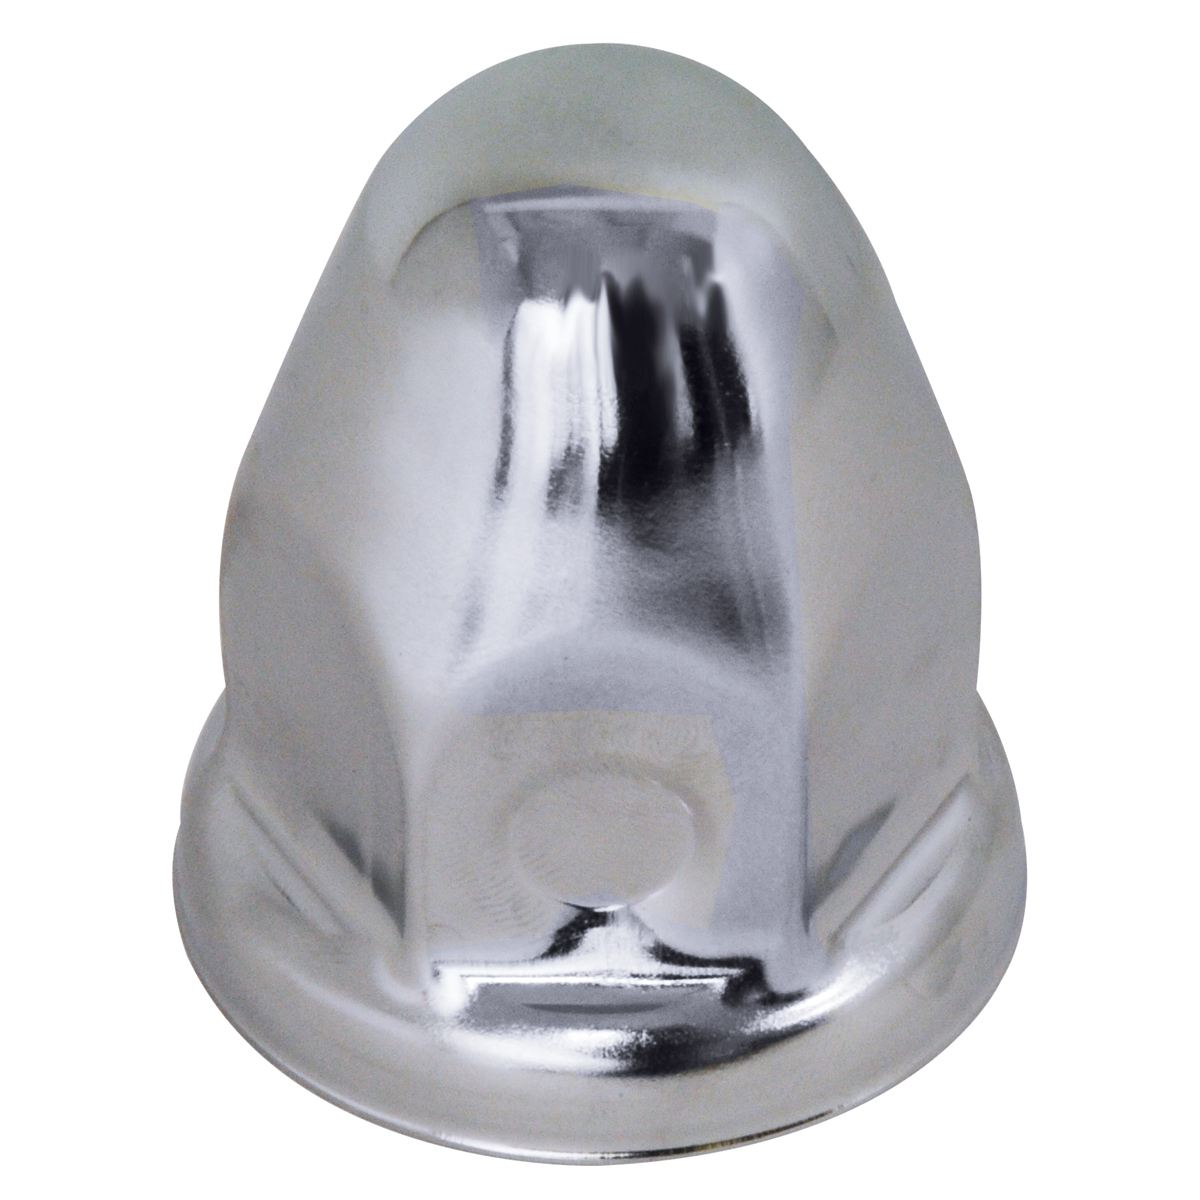 RoadPro  W-012XLF Lug Nut Cover for Semi Trucks 1.5-Inch X 2-Inch Push-On Bullet Flanged Lugnut Cover Chrome Plated